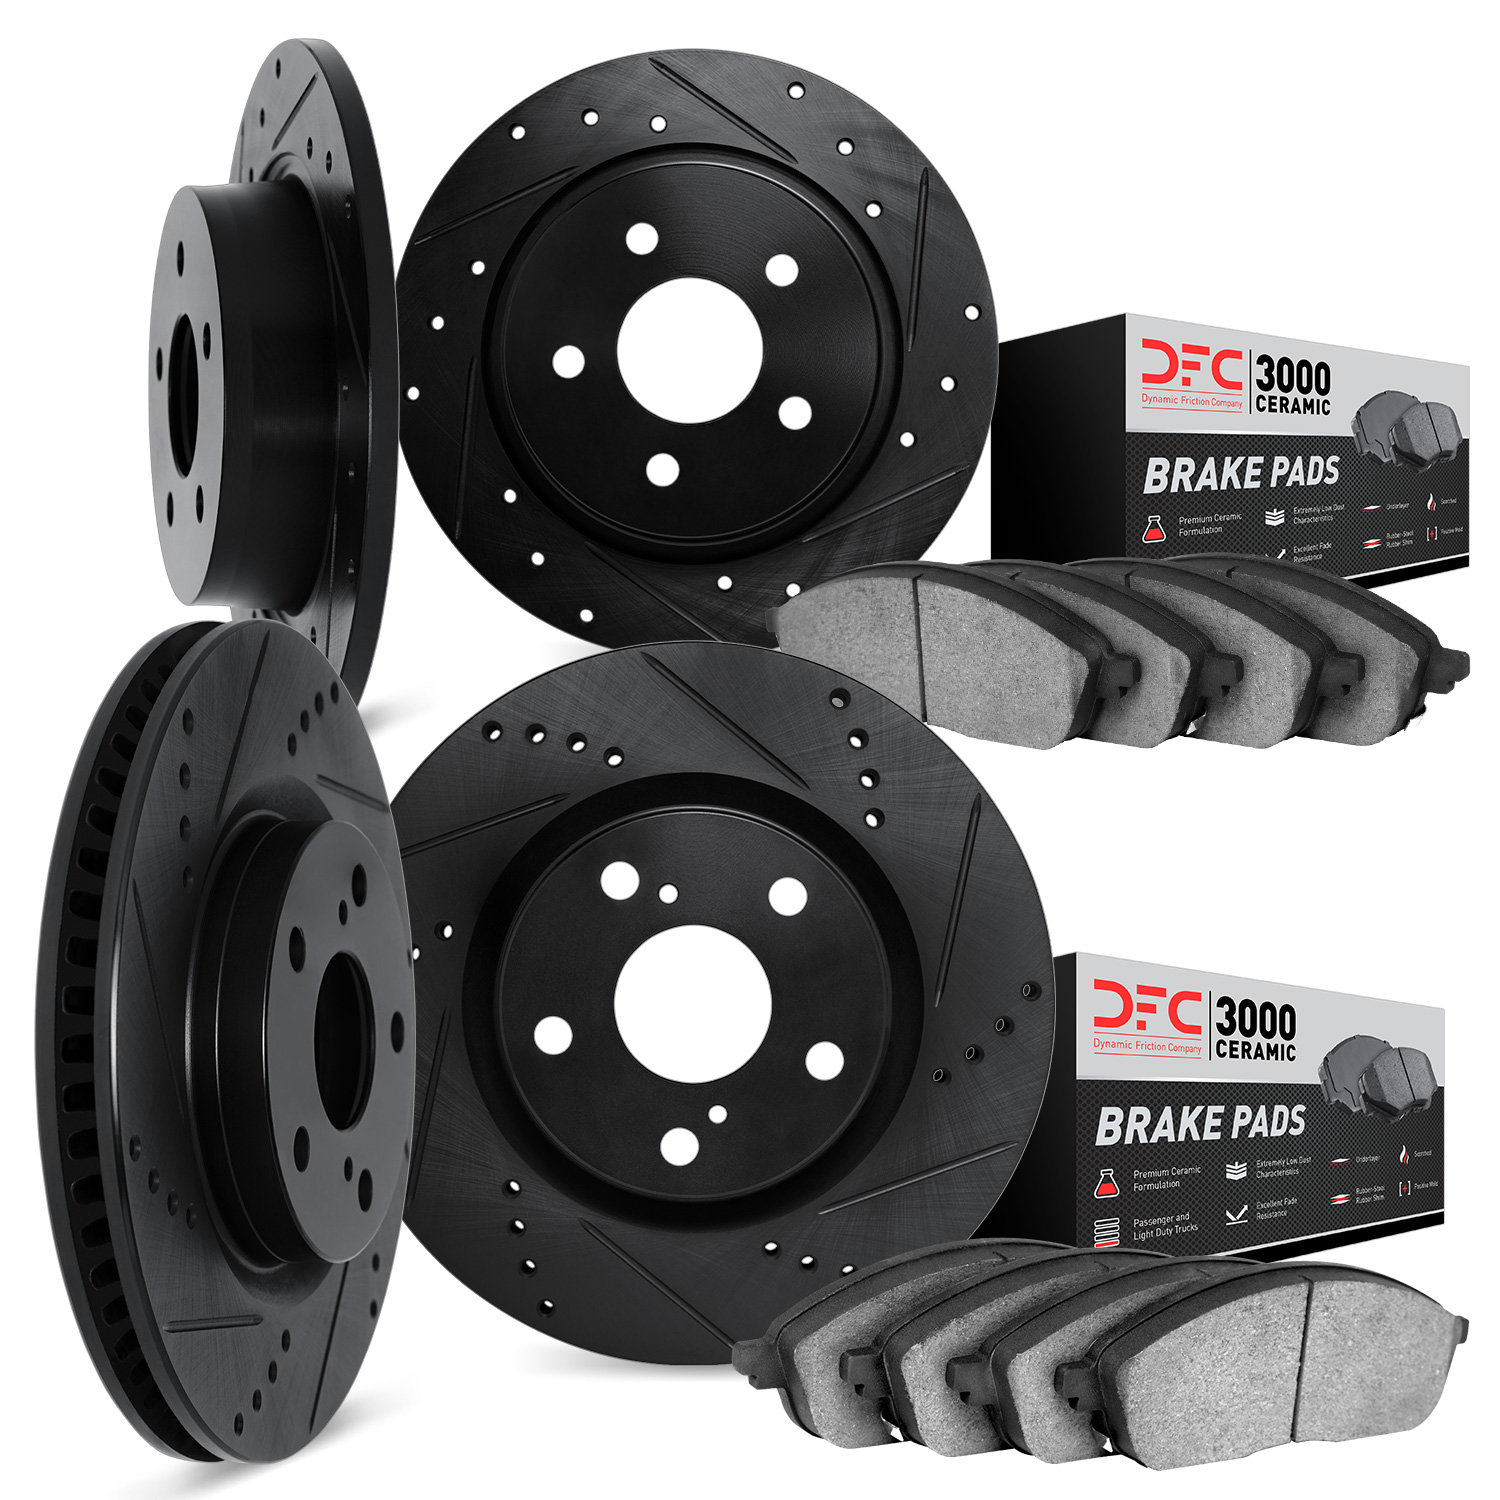 8304-40010 Drilled/Slotted Brake Rotors with 3000-Series Ceramic Brake Pads Kit [Black], 1991-1995 Mopar, Position: Front and Re